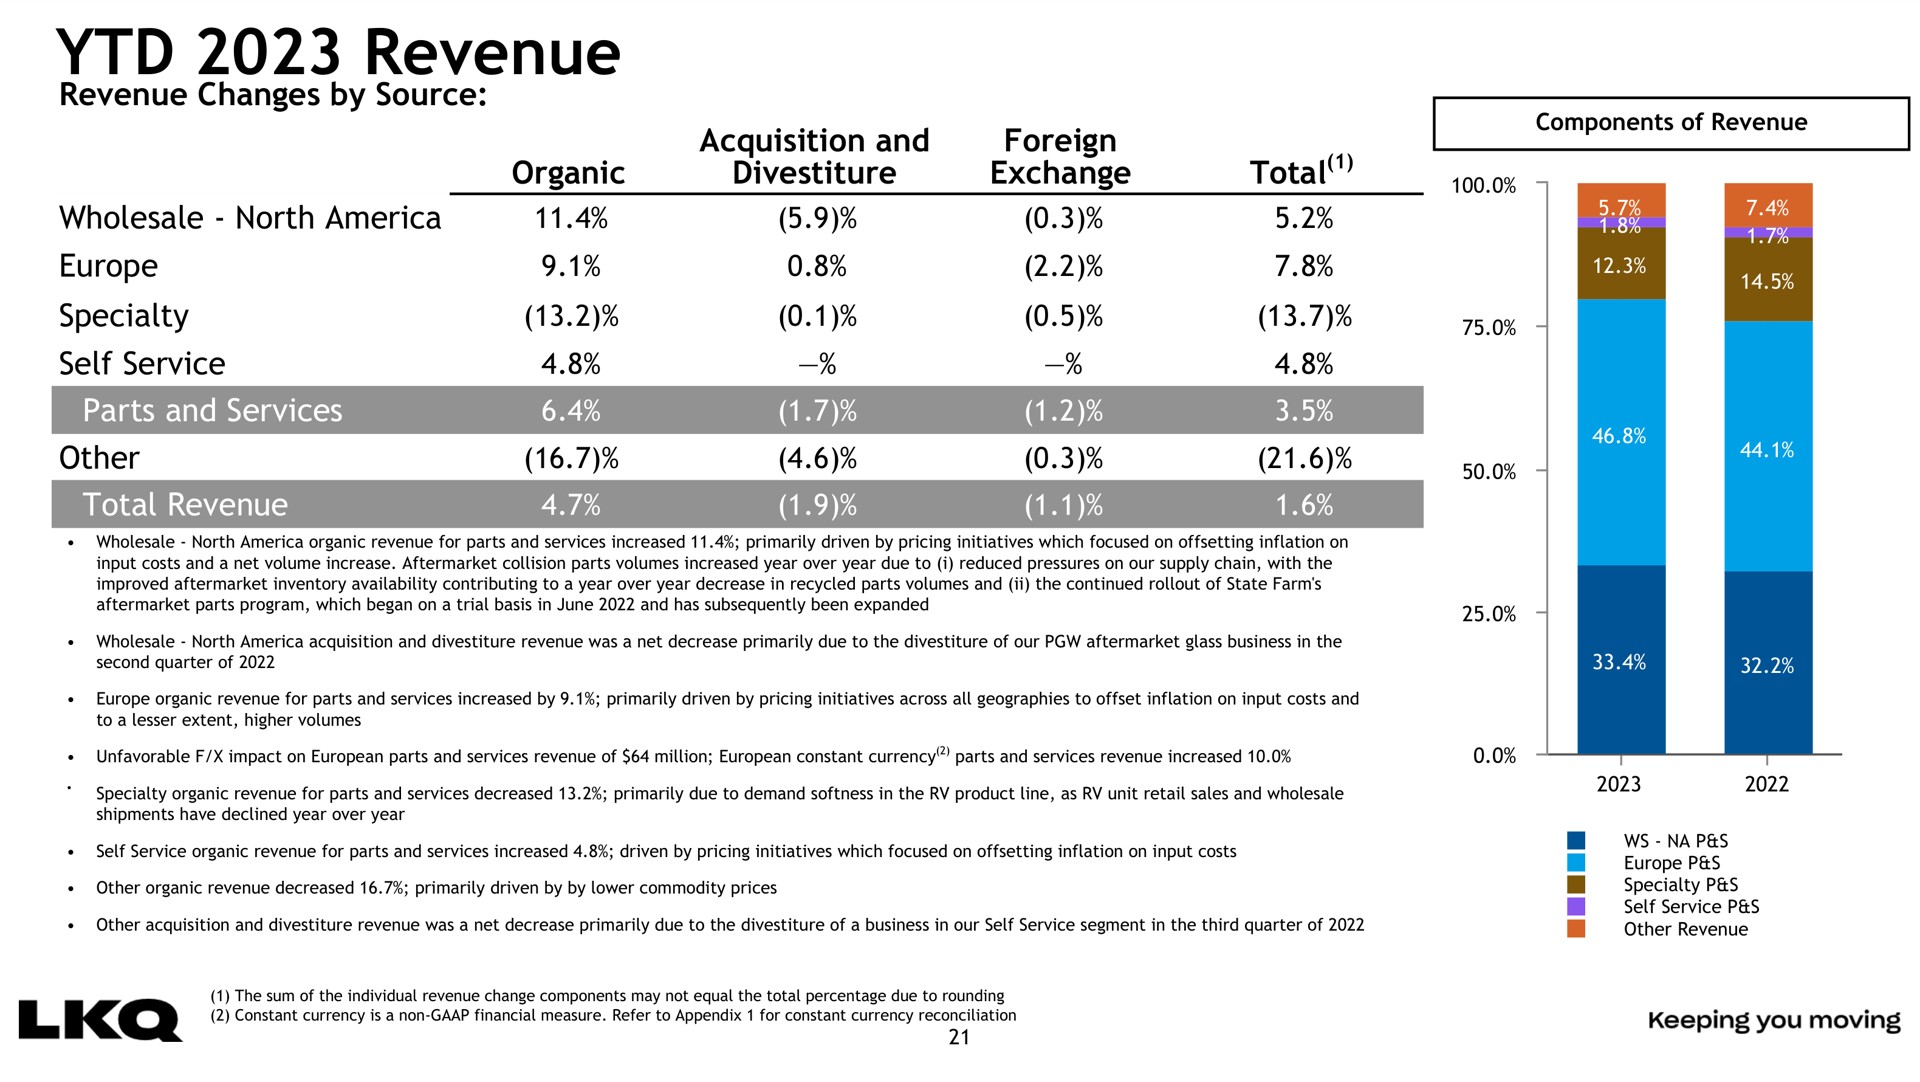 revenue specialty other organic acquisition and divestiture foreign exchange total | LKQ